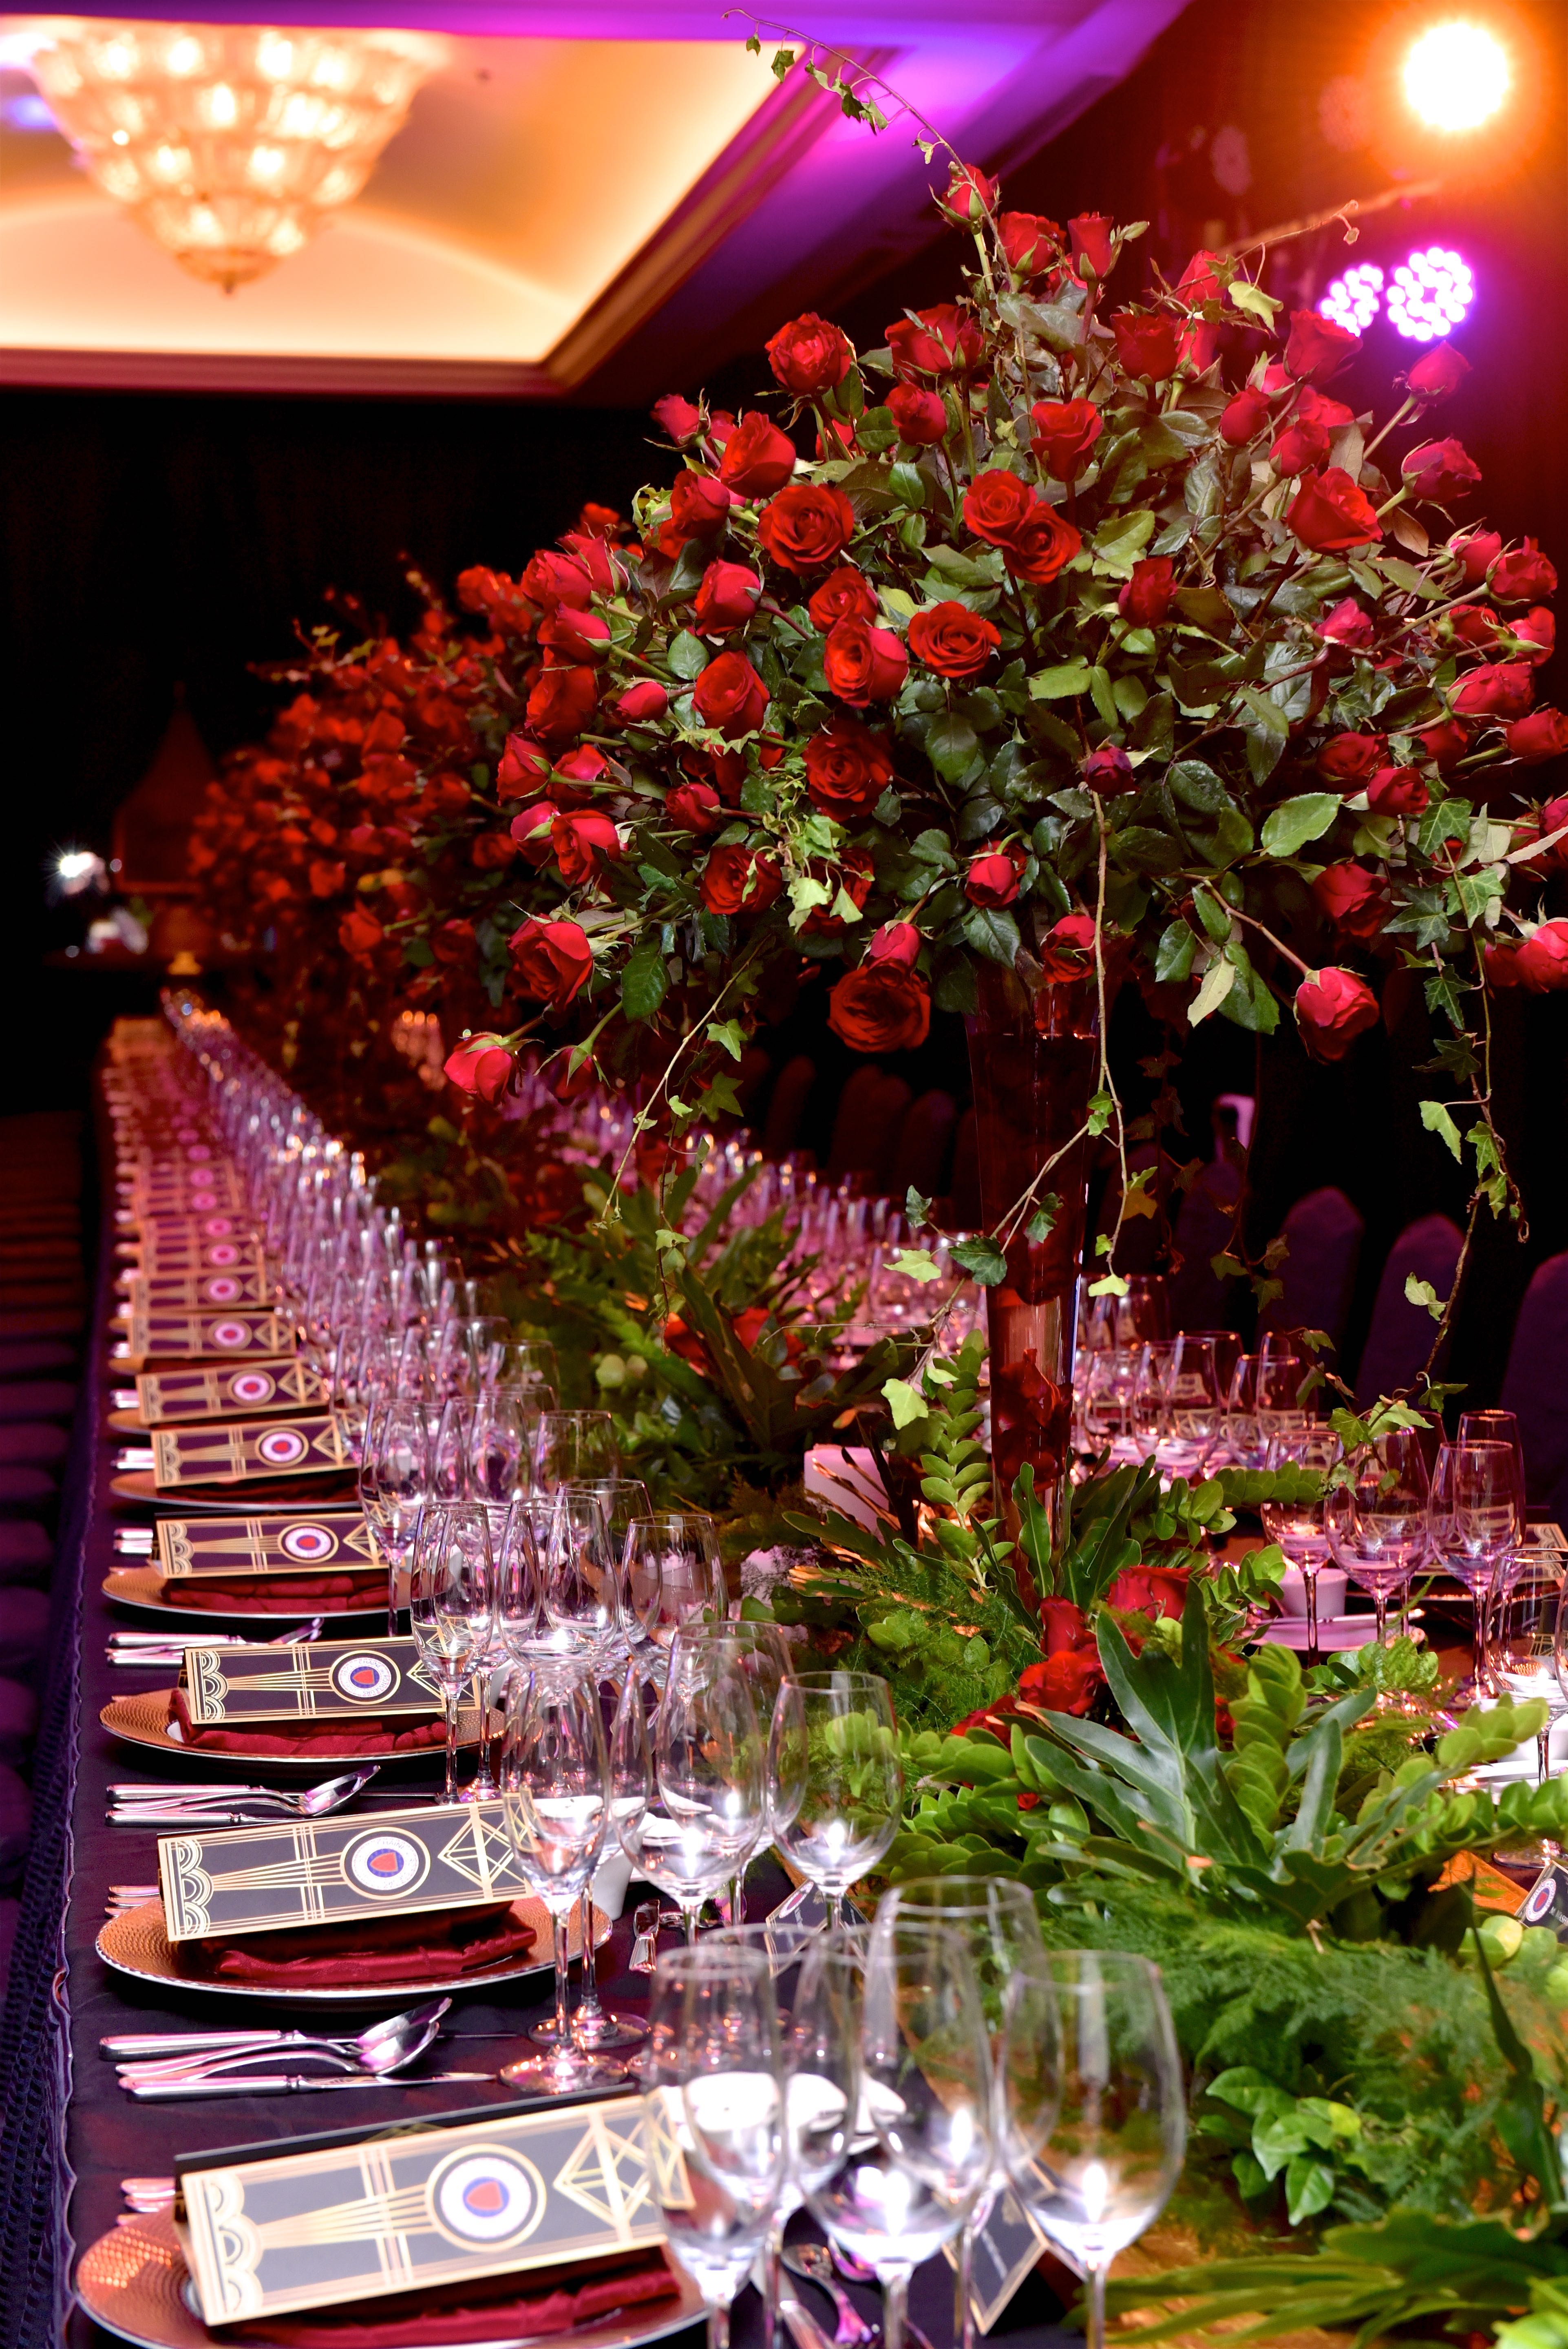 Bailliage de Manille 46th Intronisation and Grand Diner Amical "The Days of Wine and Roses"